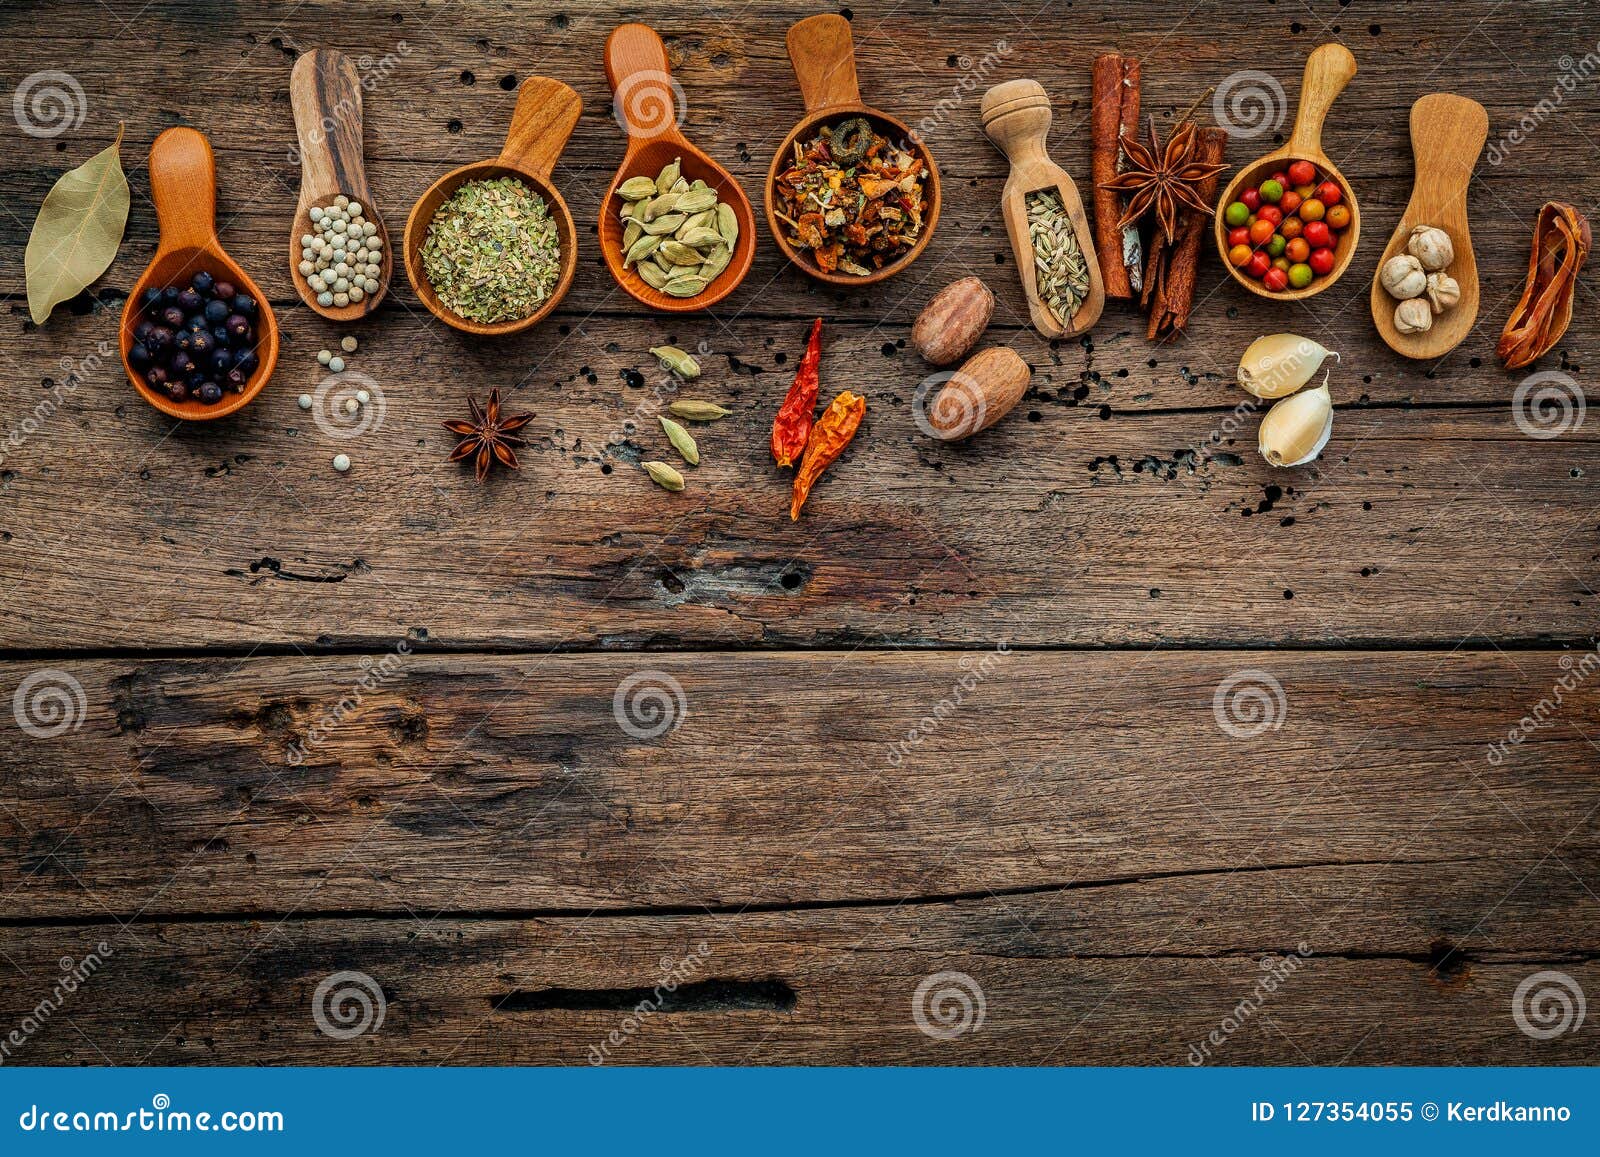 Various Herbs and Spices in Wooden Spoons . Stock Image - Image of herb ...